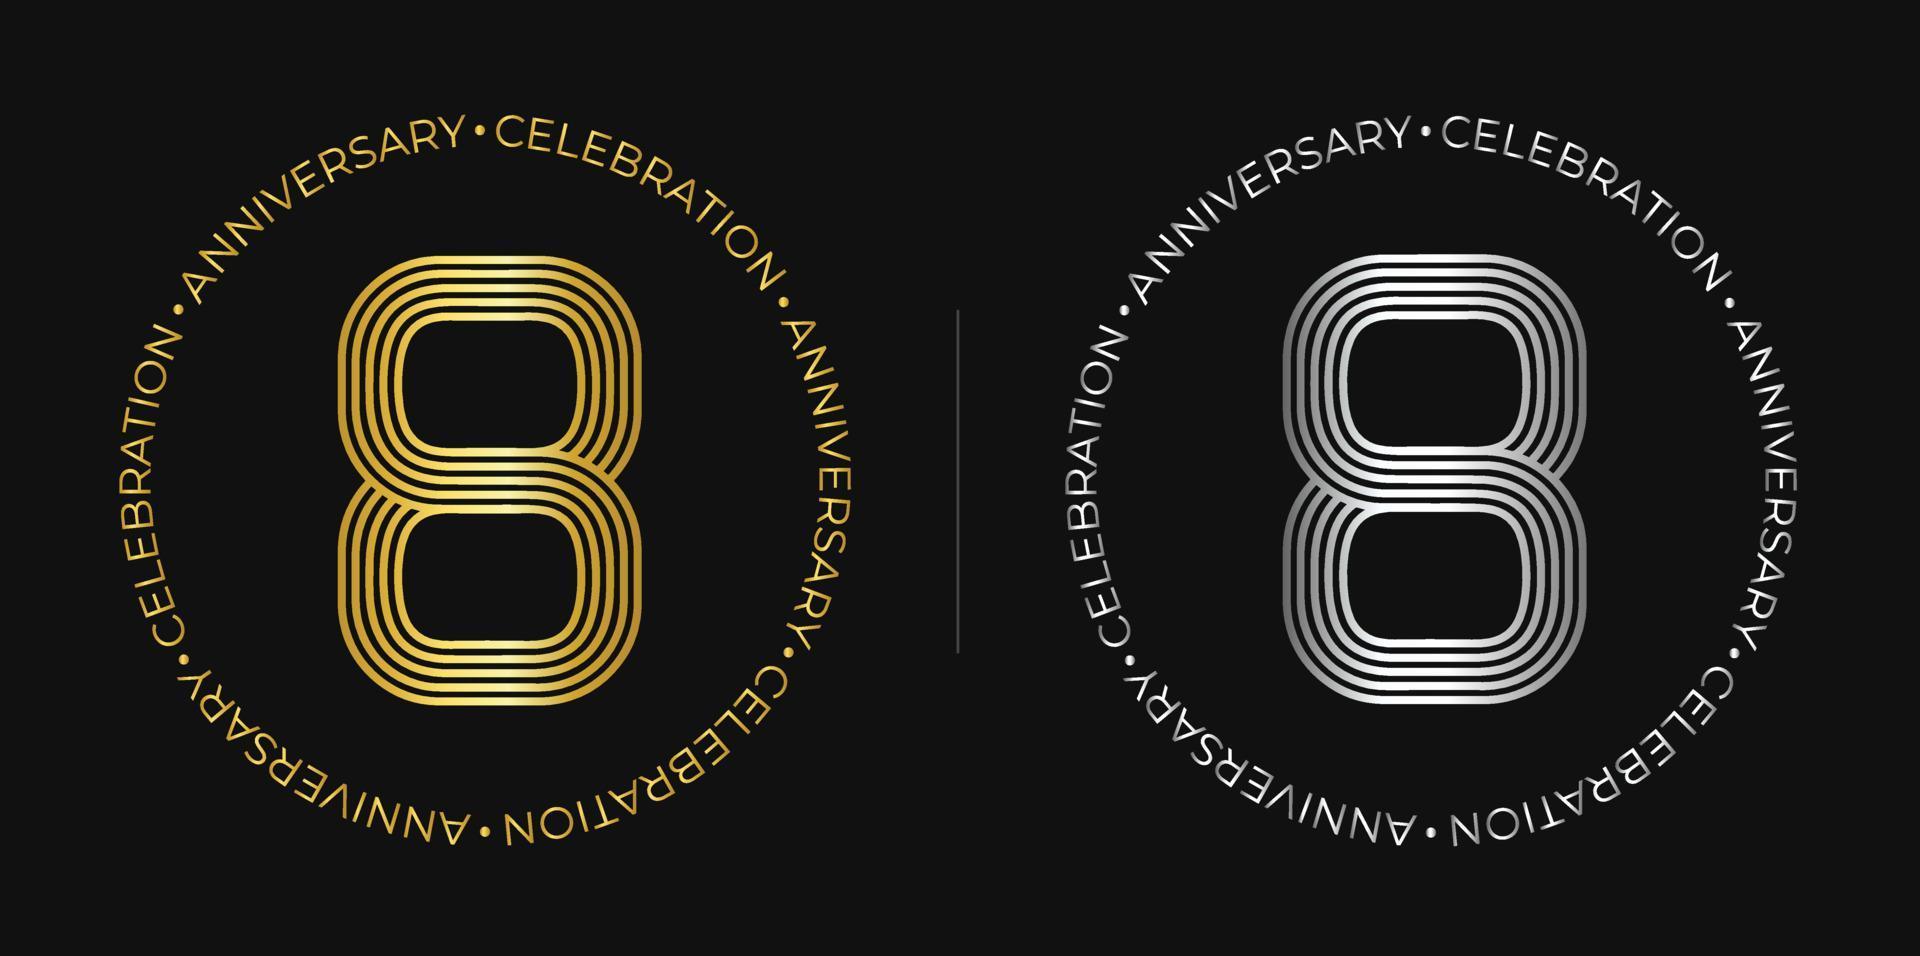 8th birthday. Eight years anniversary celebration banner in golden and silver colors. Circular logo with original number design in elegant lines.s vector